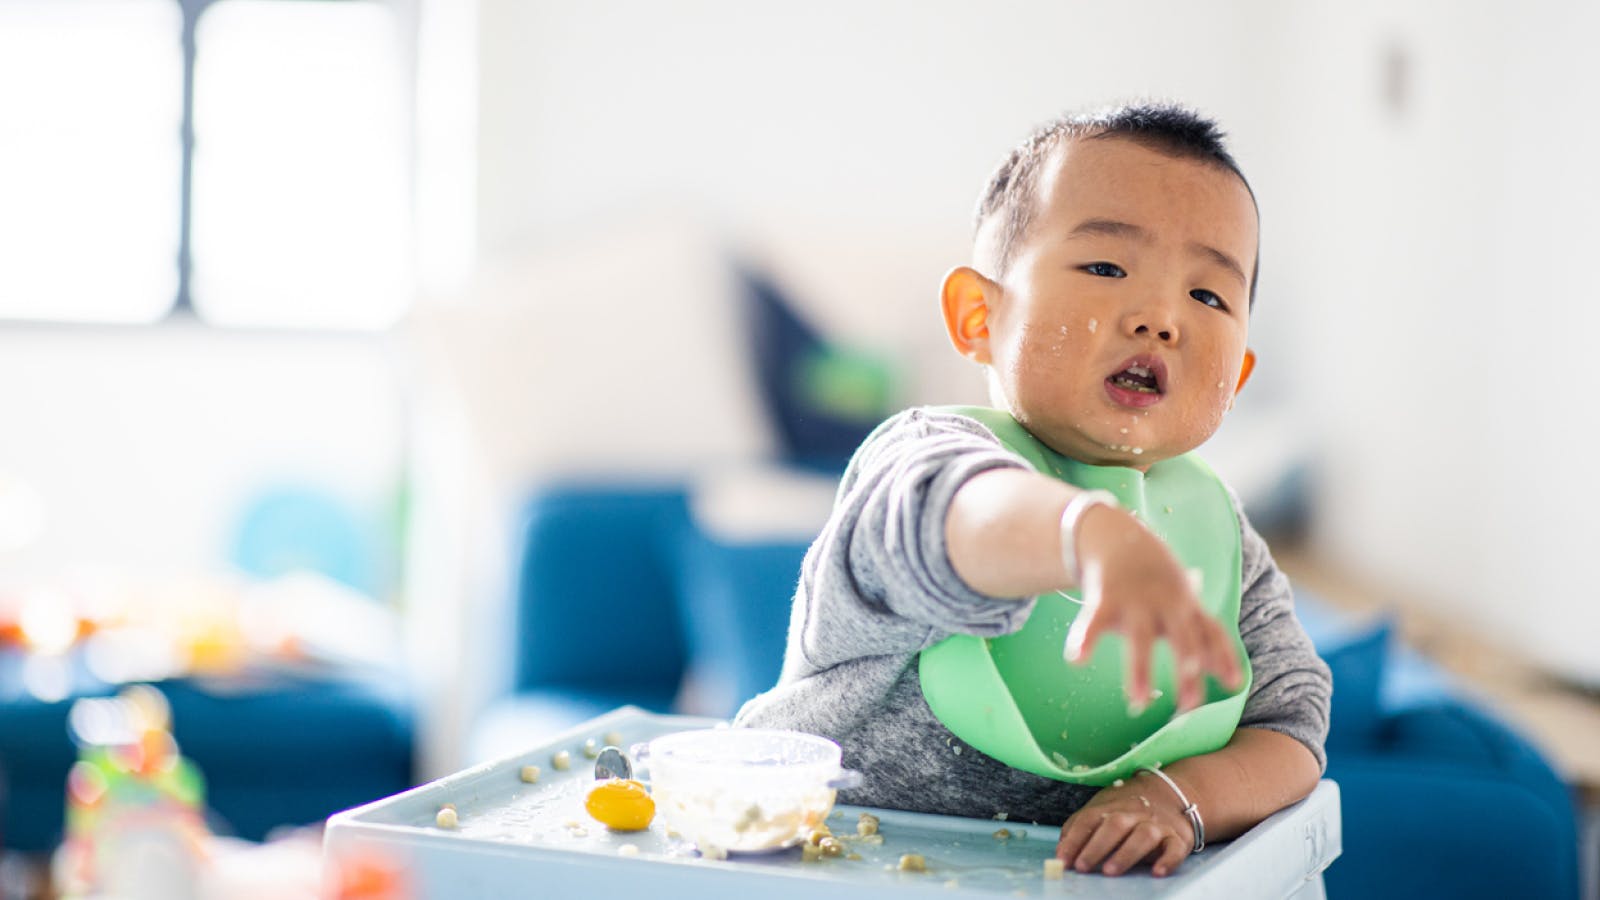 Preview image of Class: Handling Food Throwing, Cup Dropping & Other Mealtime Misbehaviors